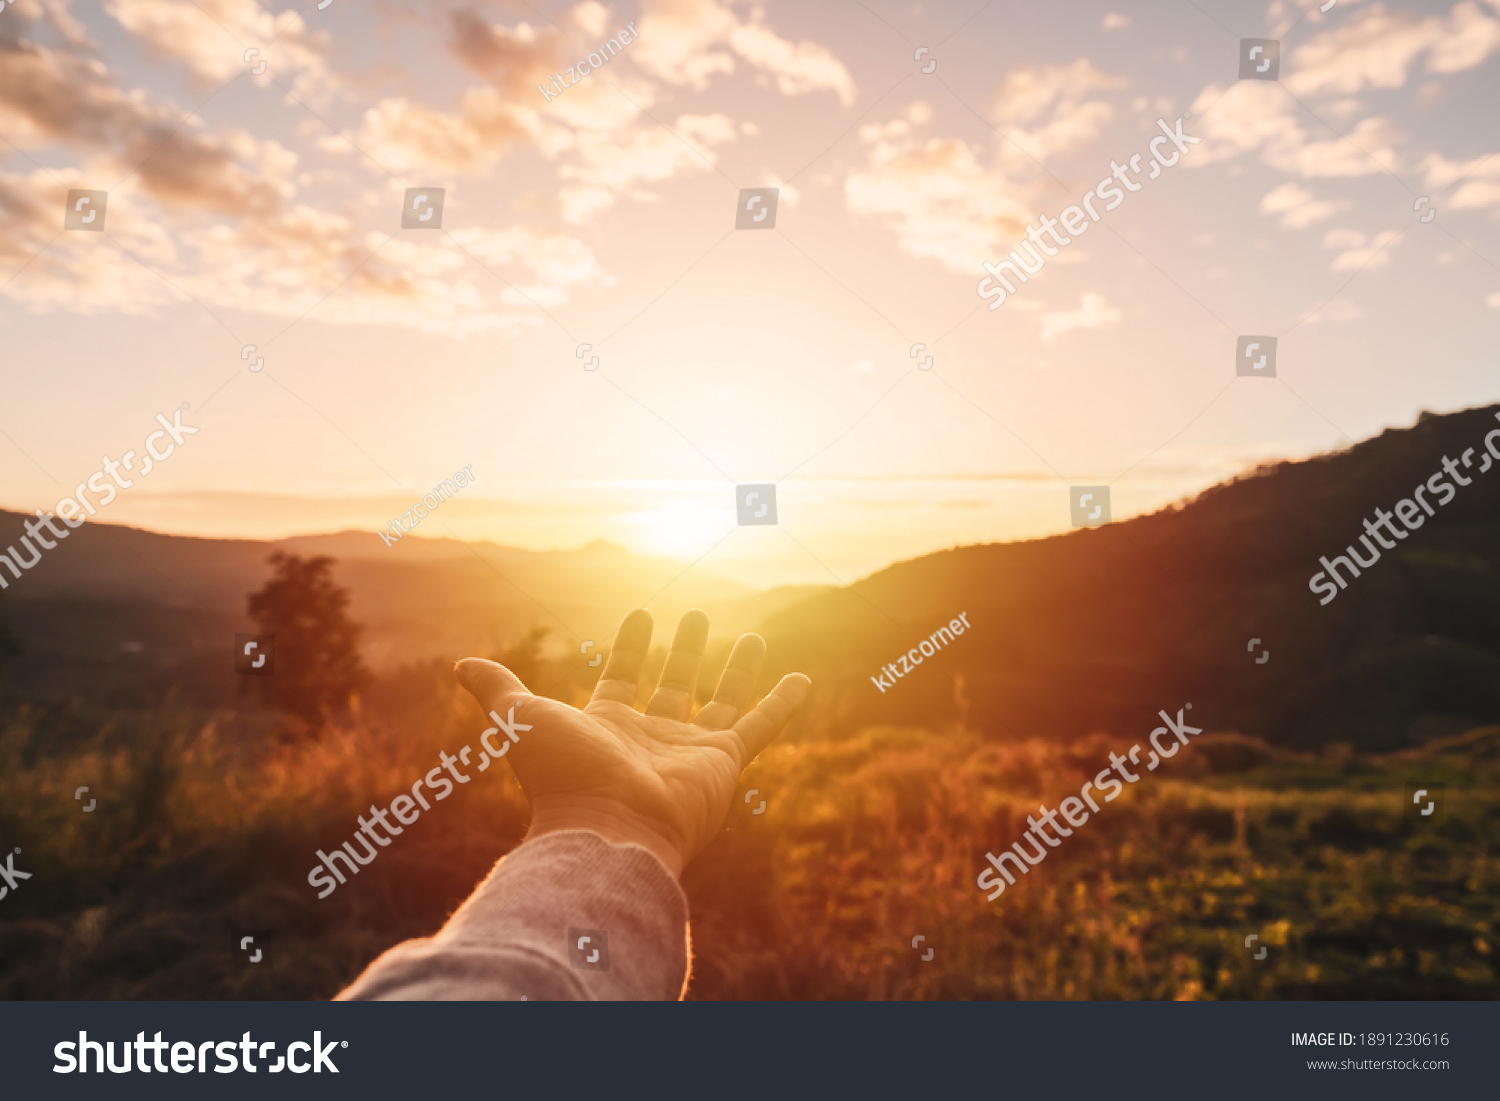 Young man hand reaching for the mountains during sunrise and beautiful landscape #1891230616